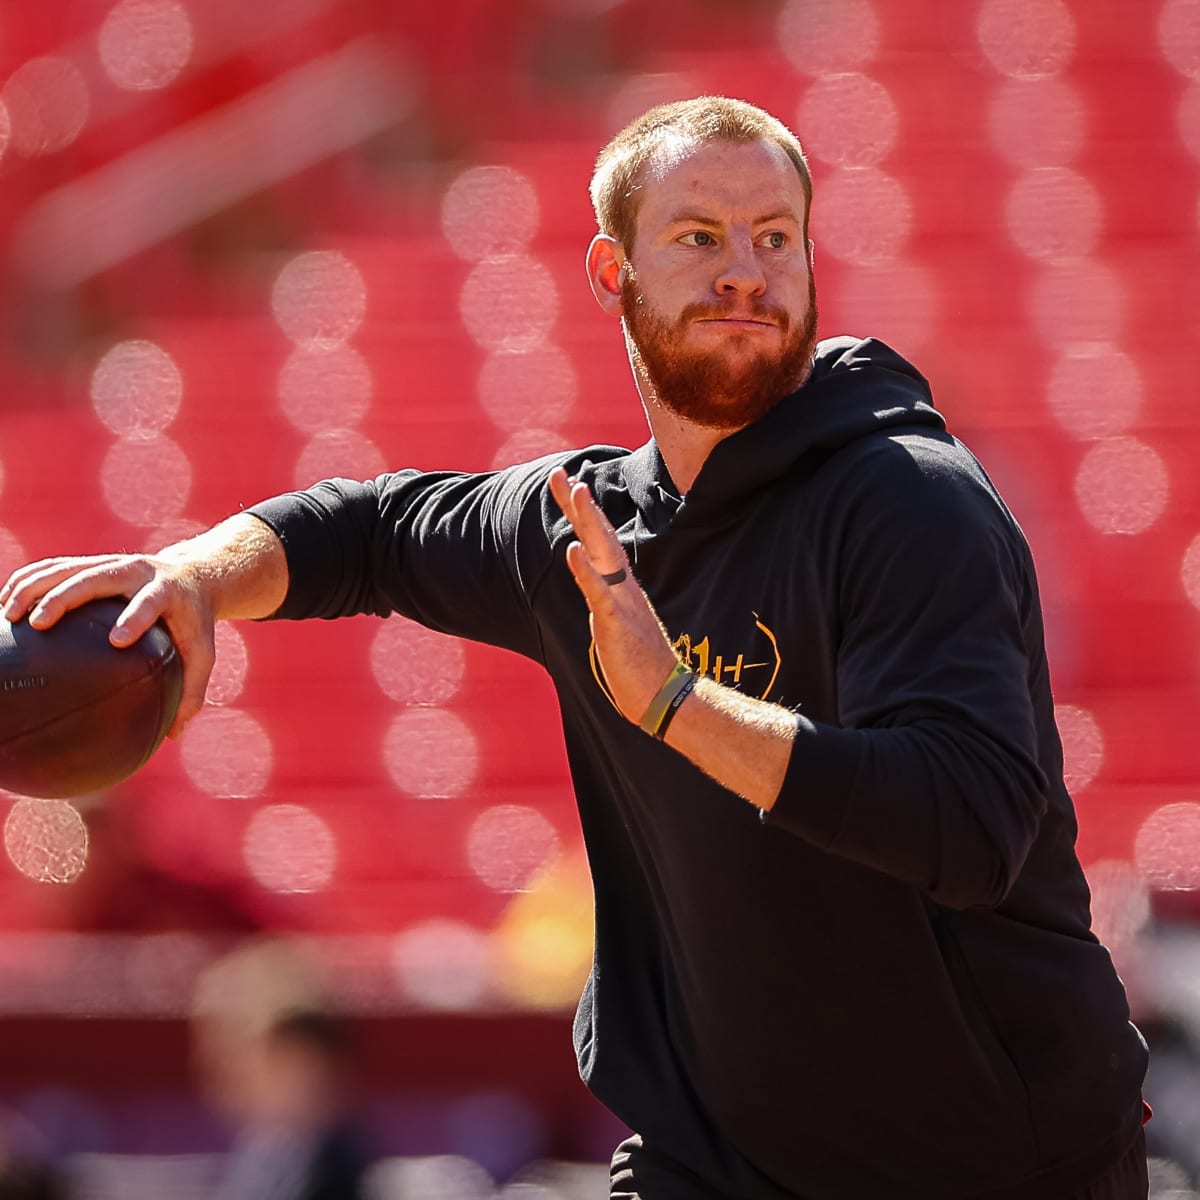 Carson Wentz wears gear from all 3 former teams during recent workout